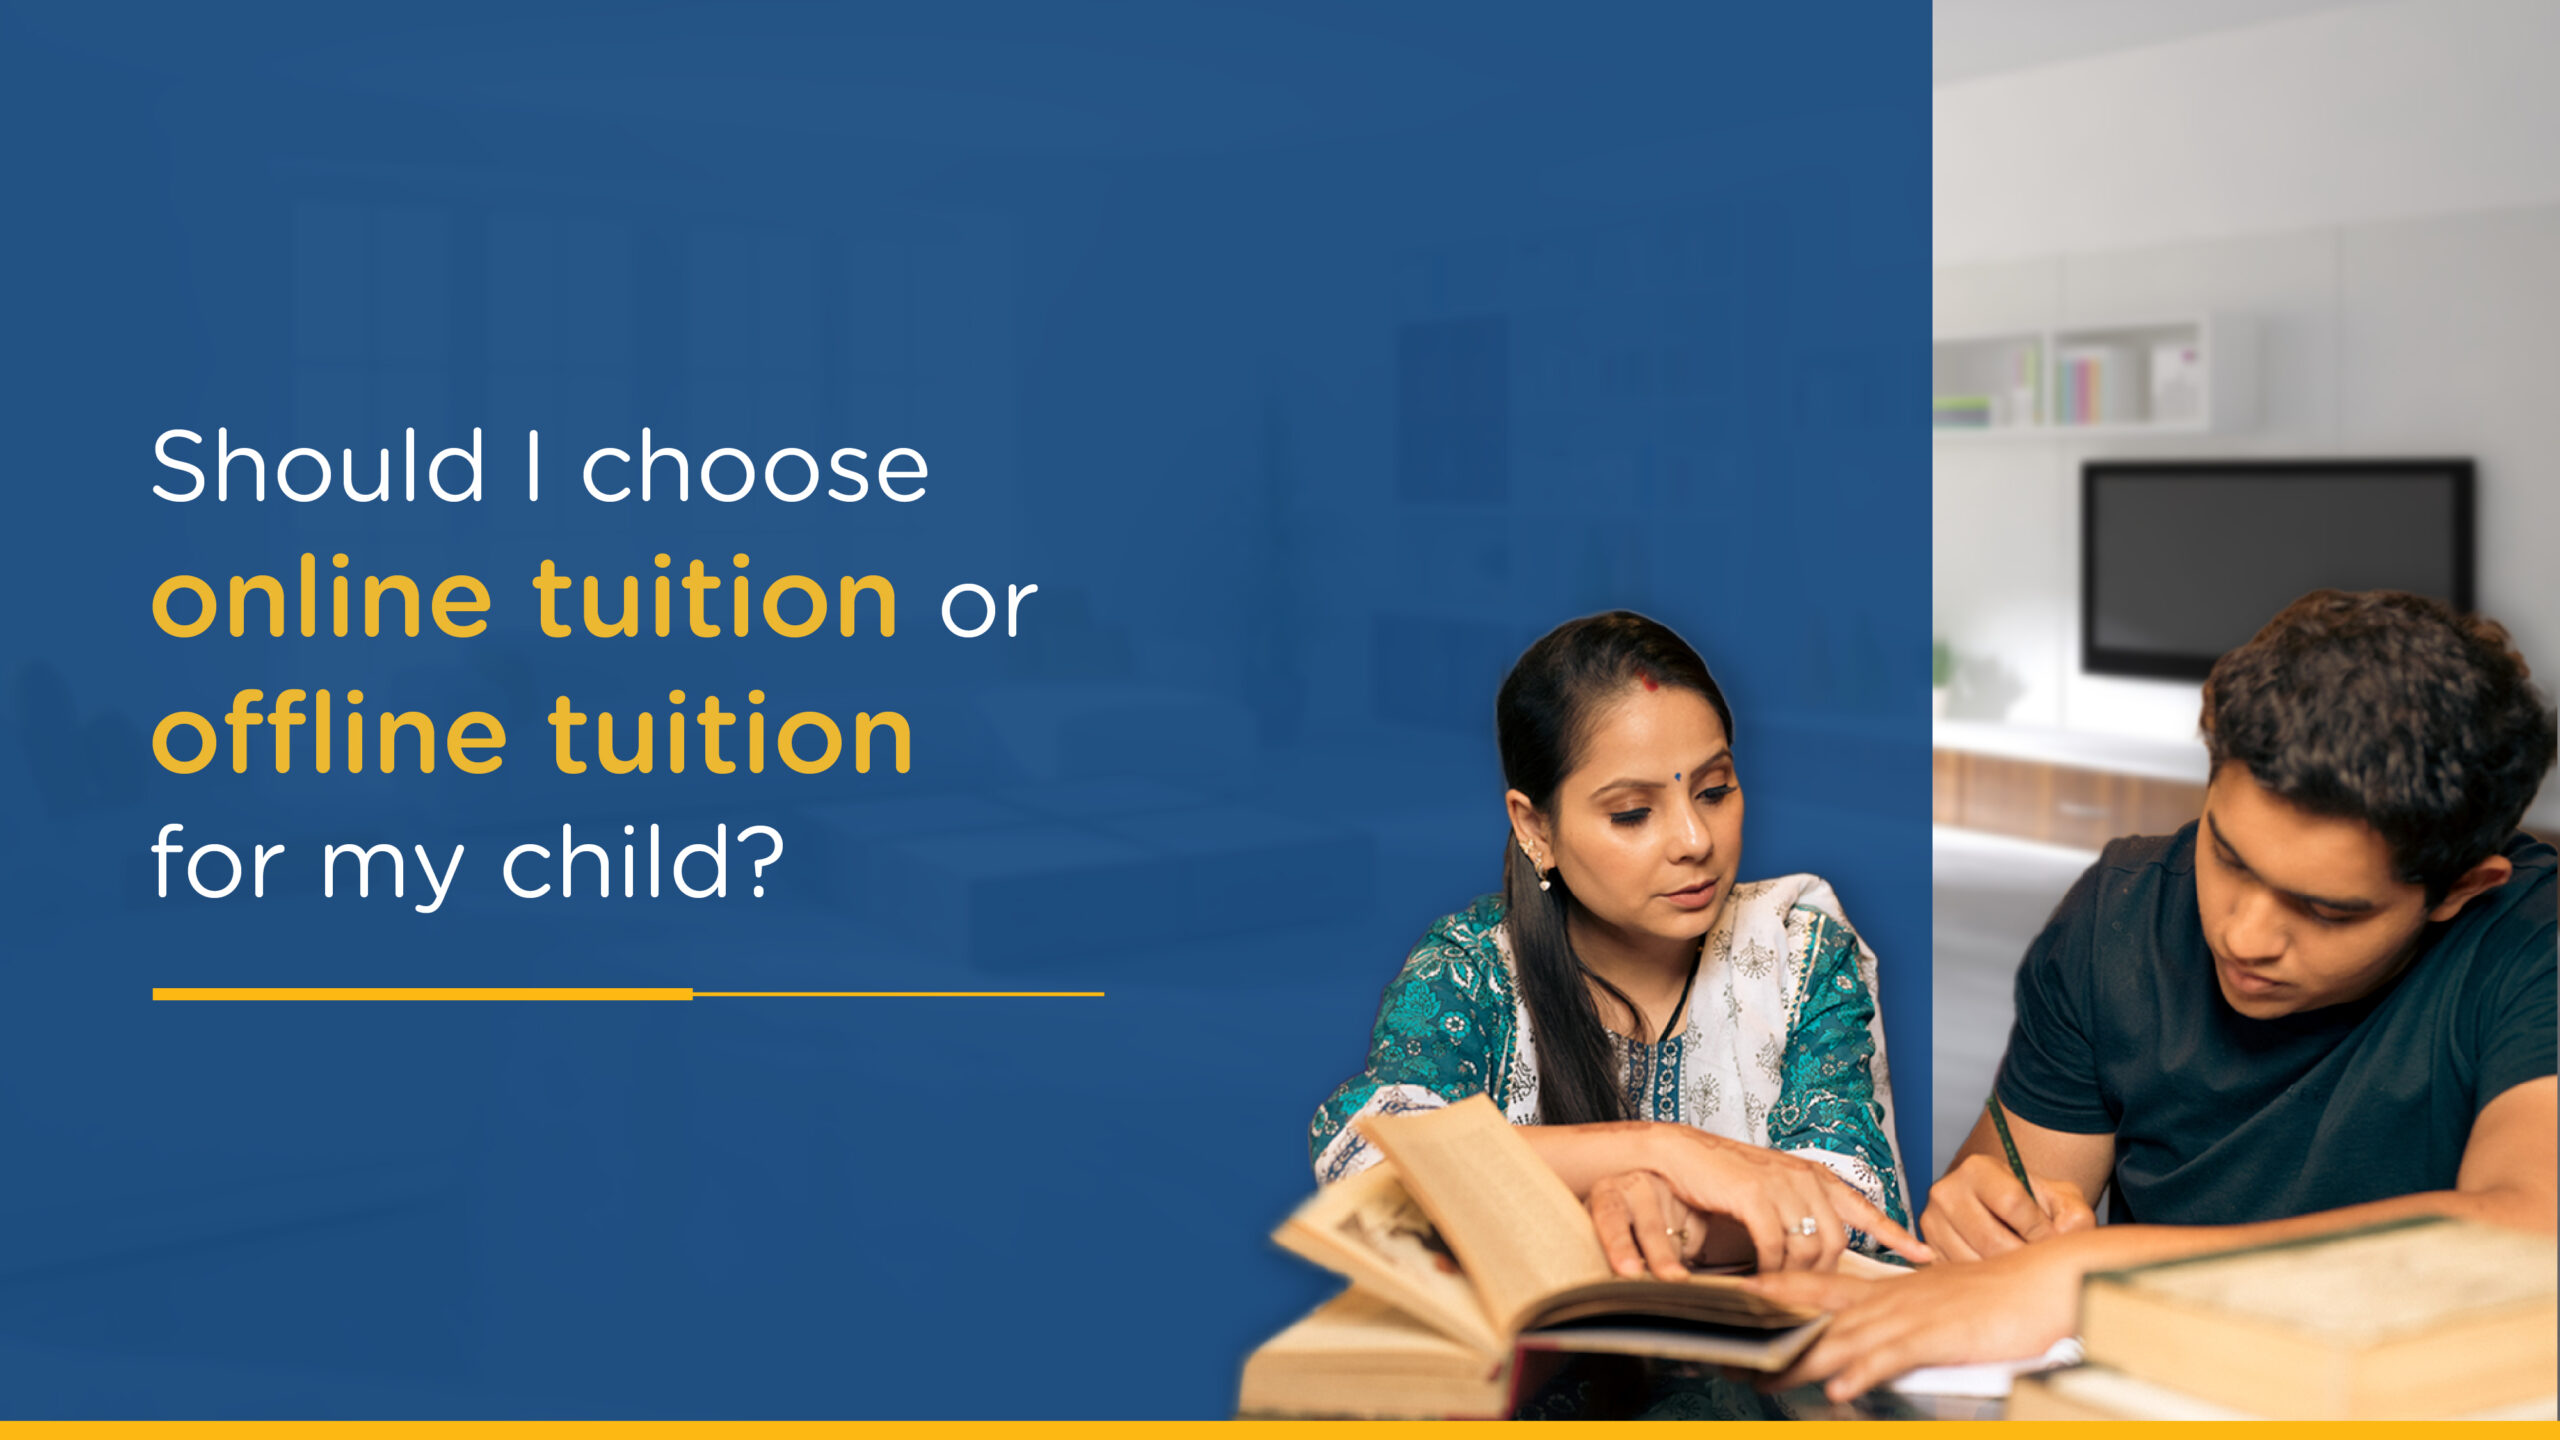 Should I Choose Online Tuition or Offline Tuition for My Child?